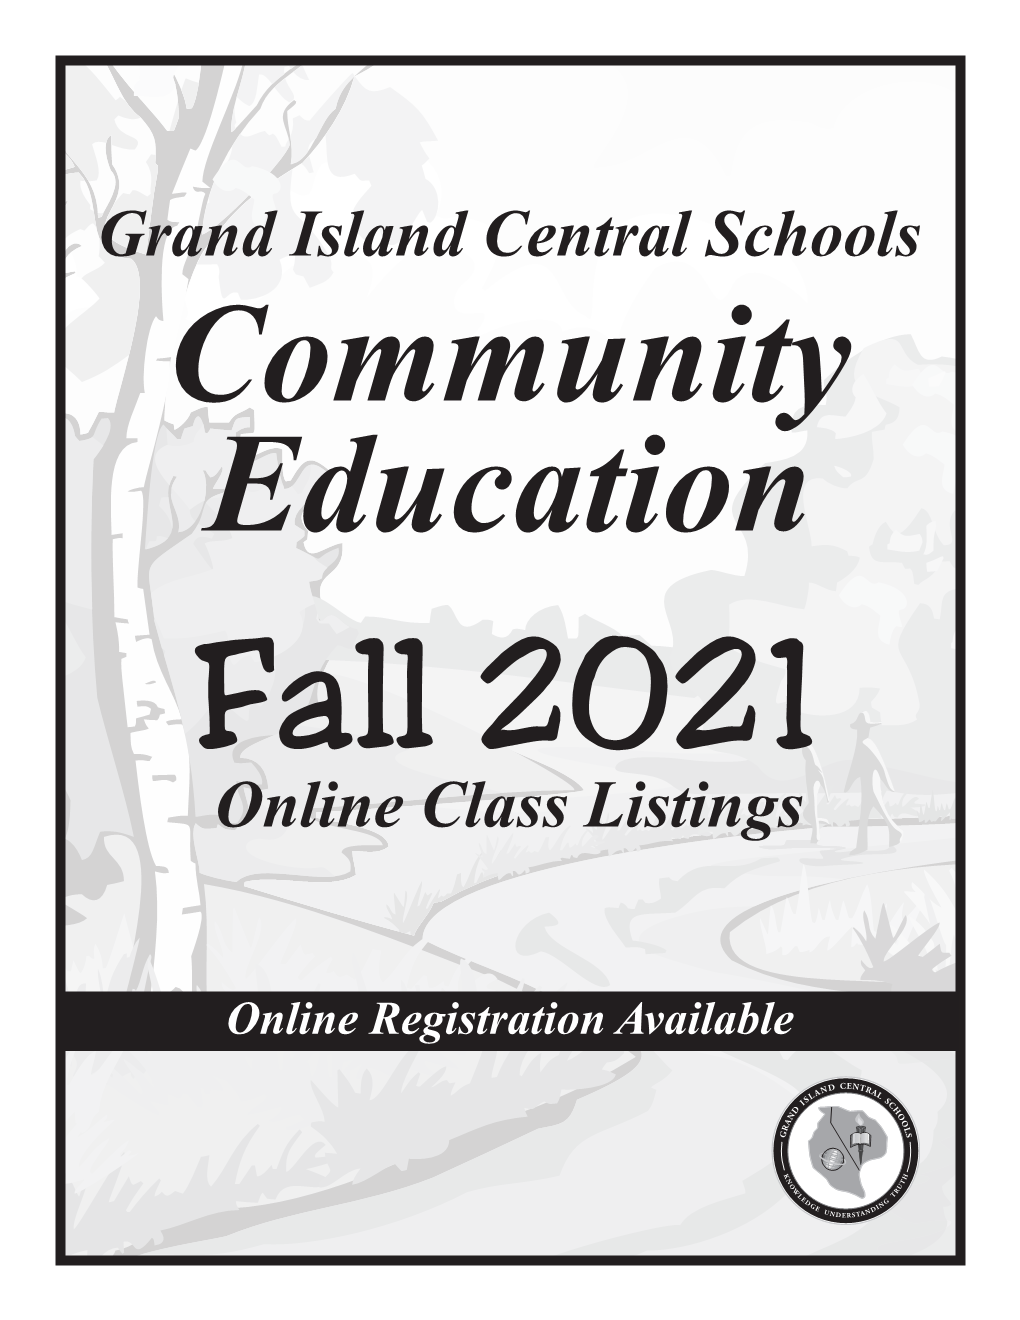 Grand Island Central Schools Community Education Fall 2021 Online Class Listings